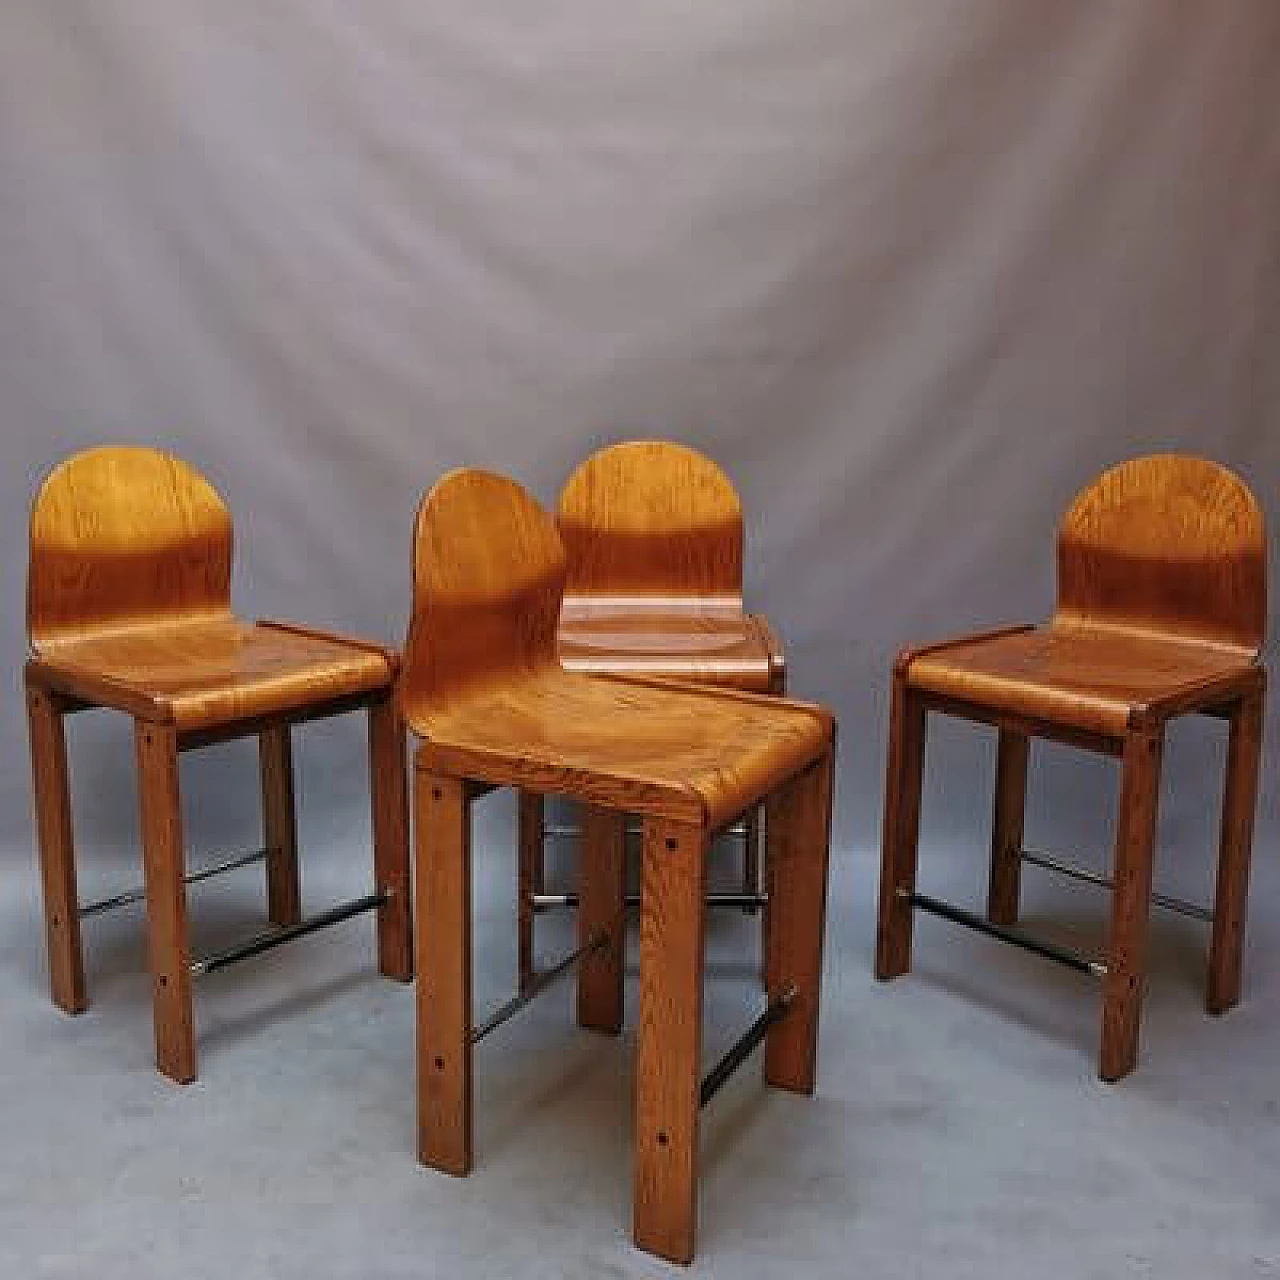 4 Wooden stools, 1960s 1